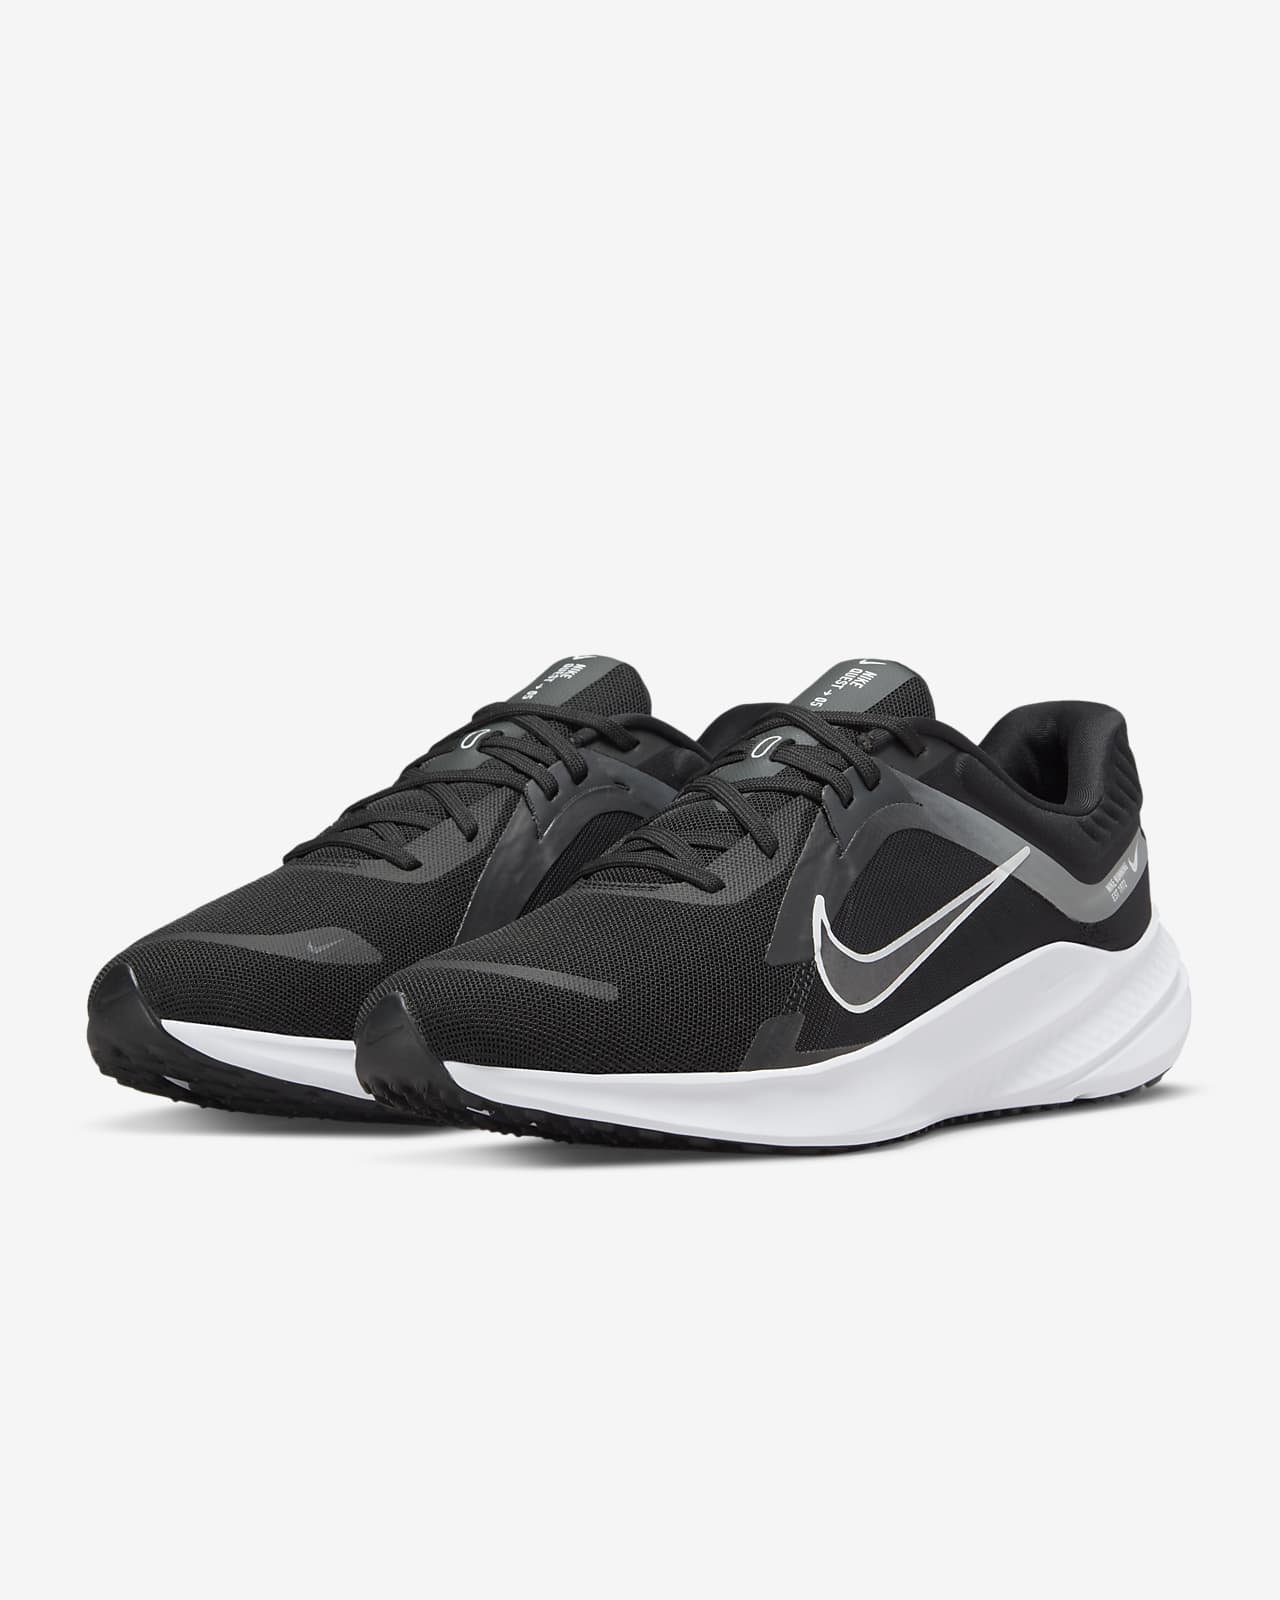 Nike Quest 5 Men's Road Running Shoes. Nike IL